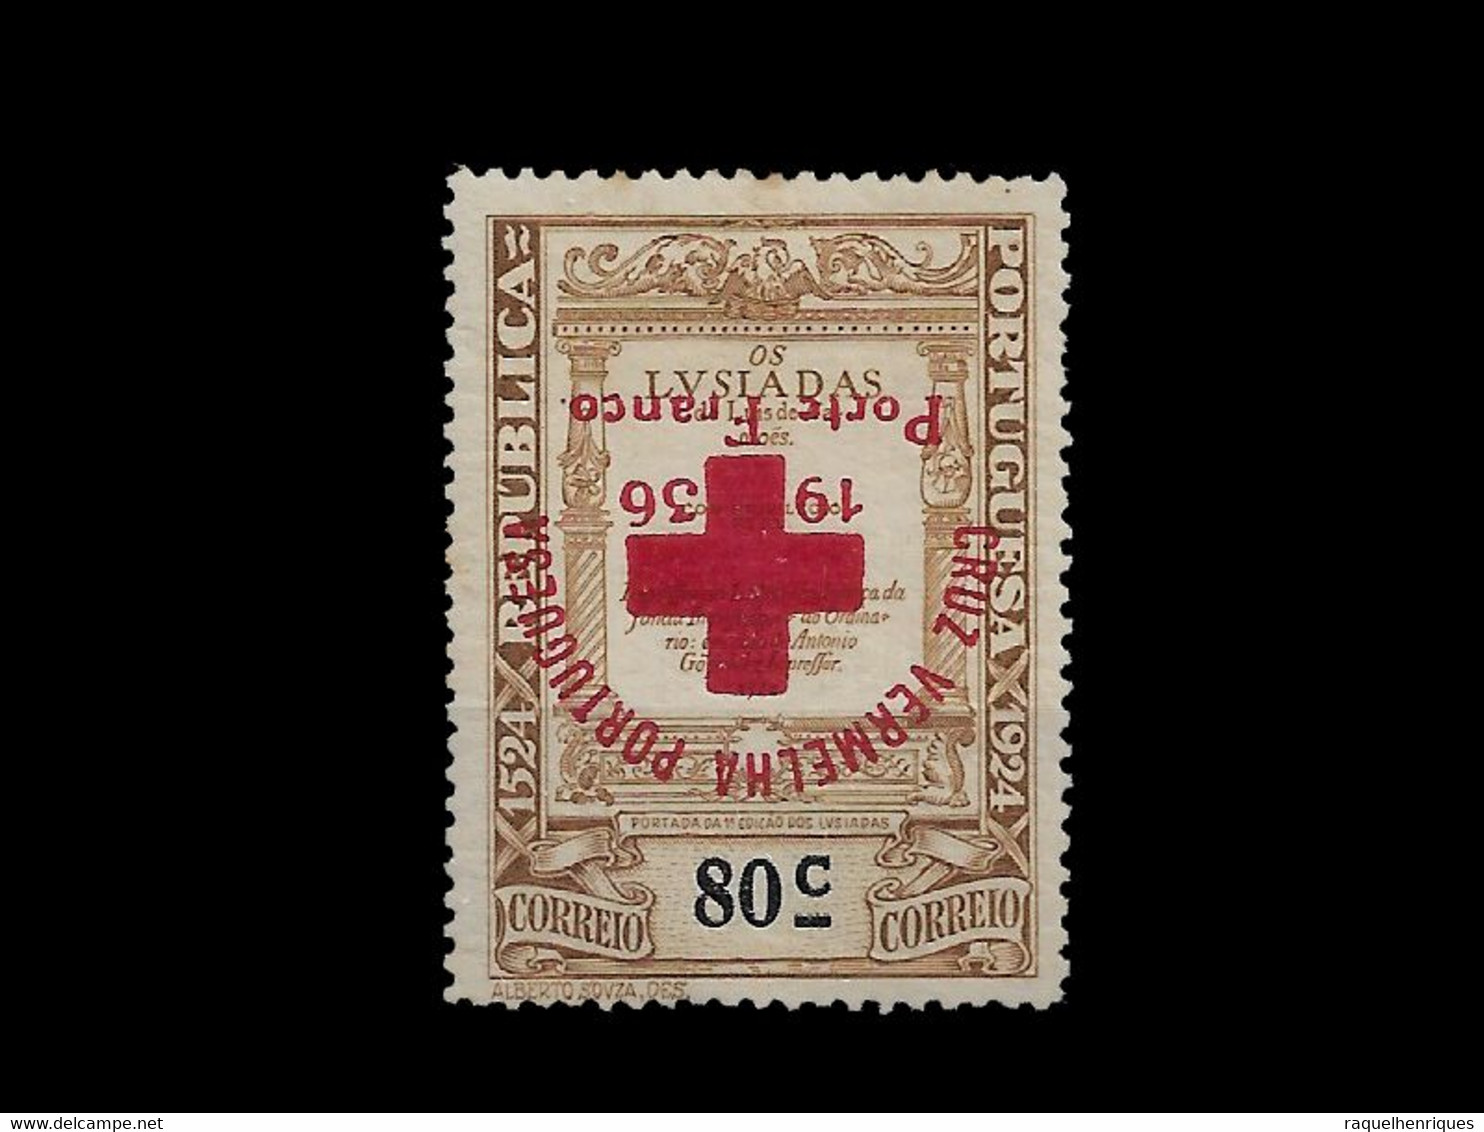 PORTUGAL PORTE FRANCO - 1936 ERROR UPSIDE DOWN SURCHARGED MH (PLB#01-137) - Unused Stamps